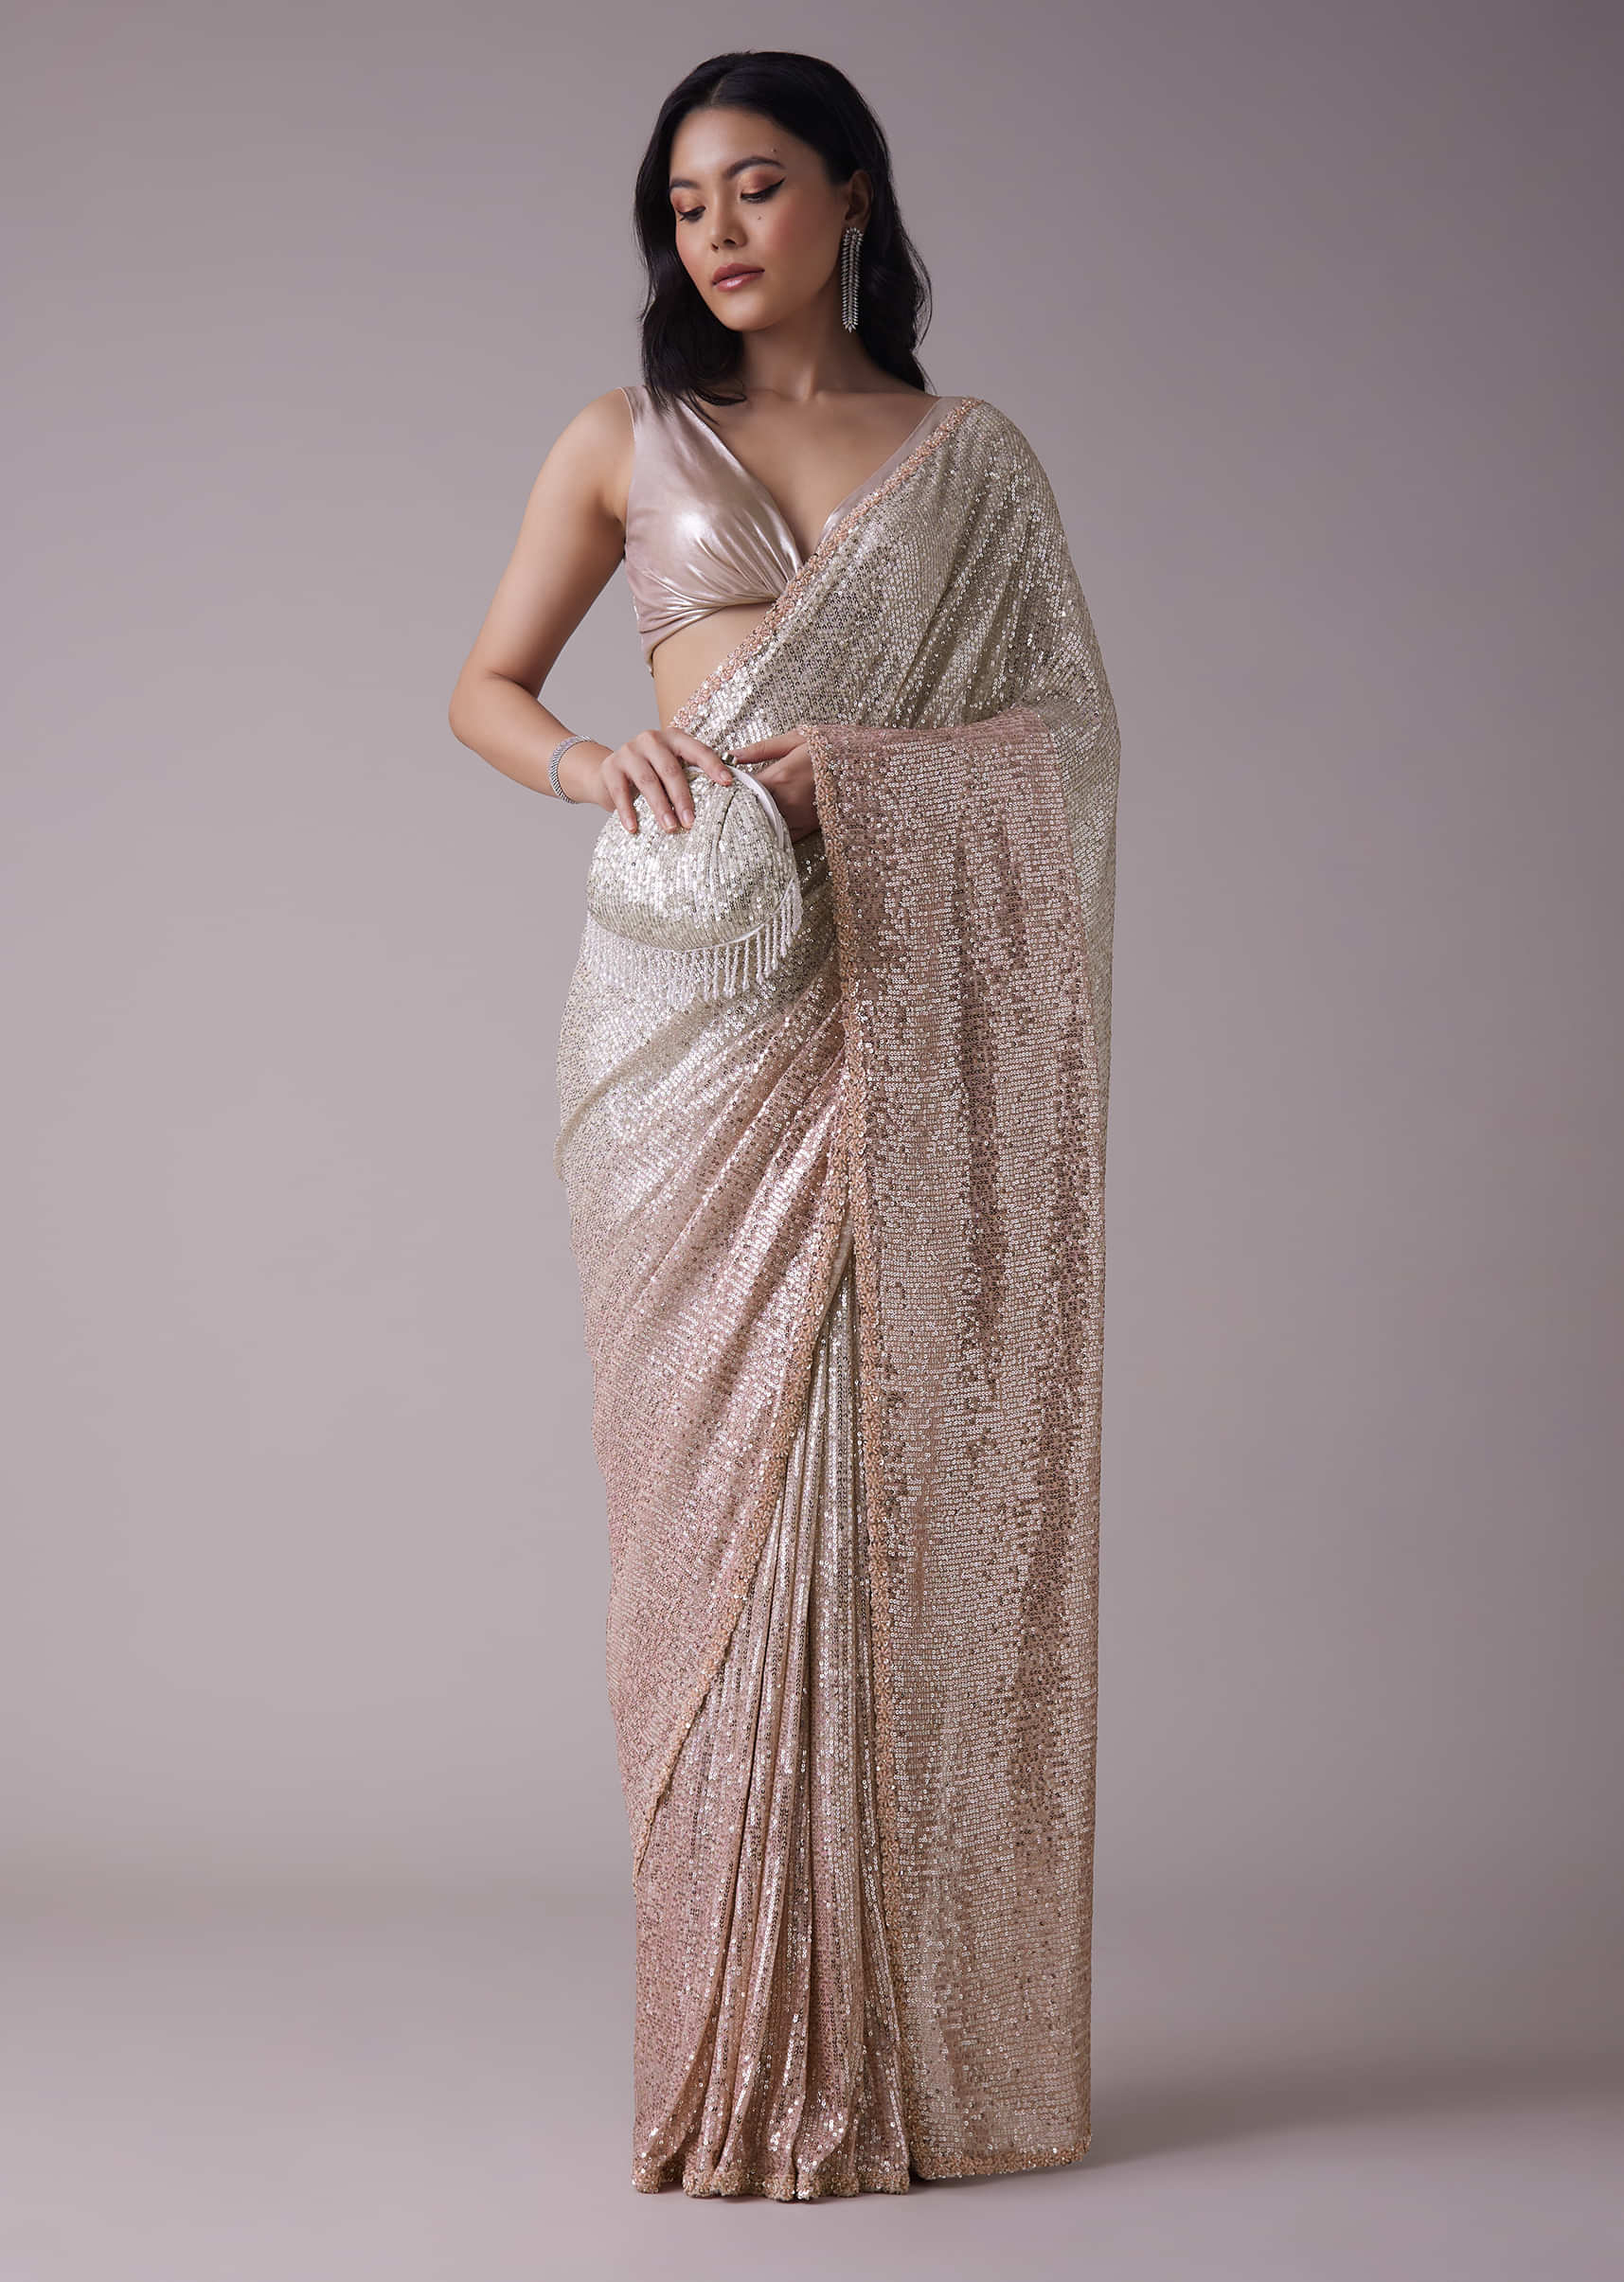 Peach Pink And Silver Toned Sequins Saree With An Embellished Border